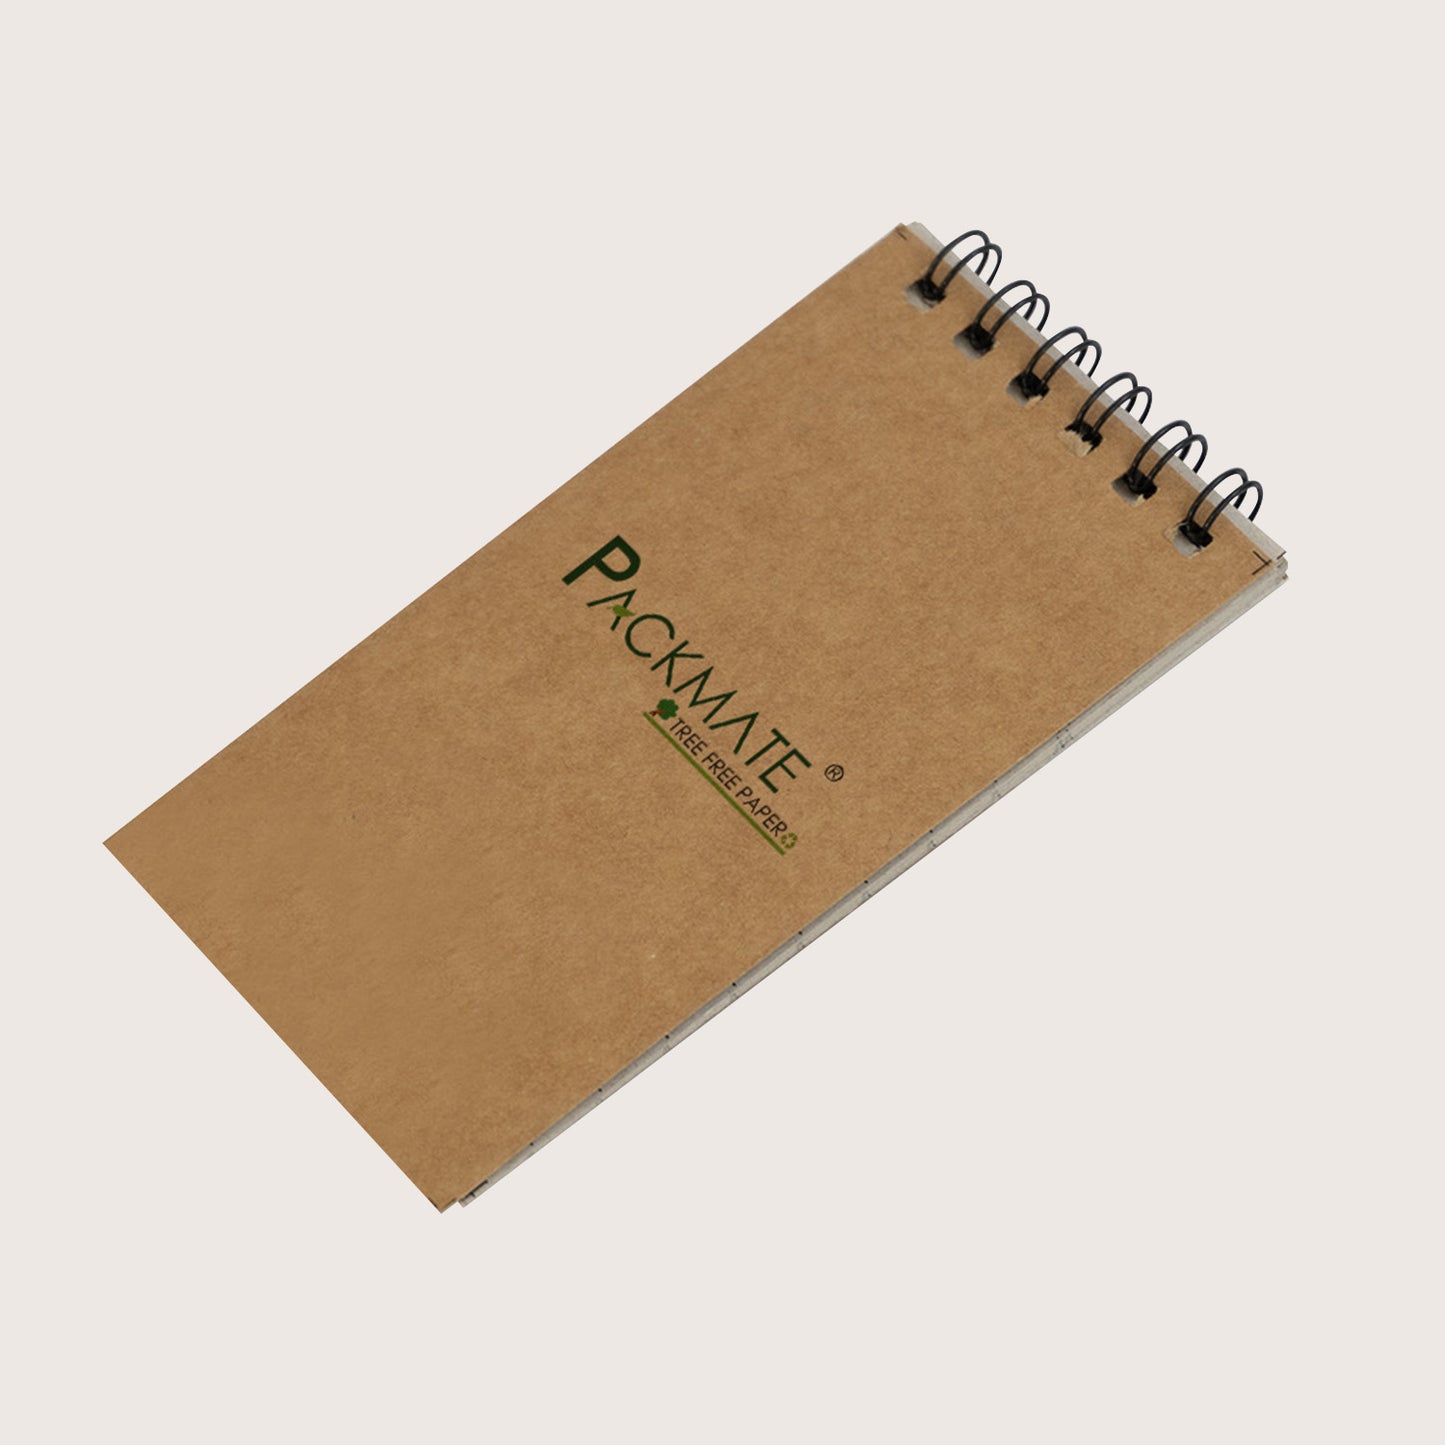 Packmate Pocket Diary | Pack of 10 | Made from 100% Recycled Paper